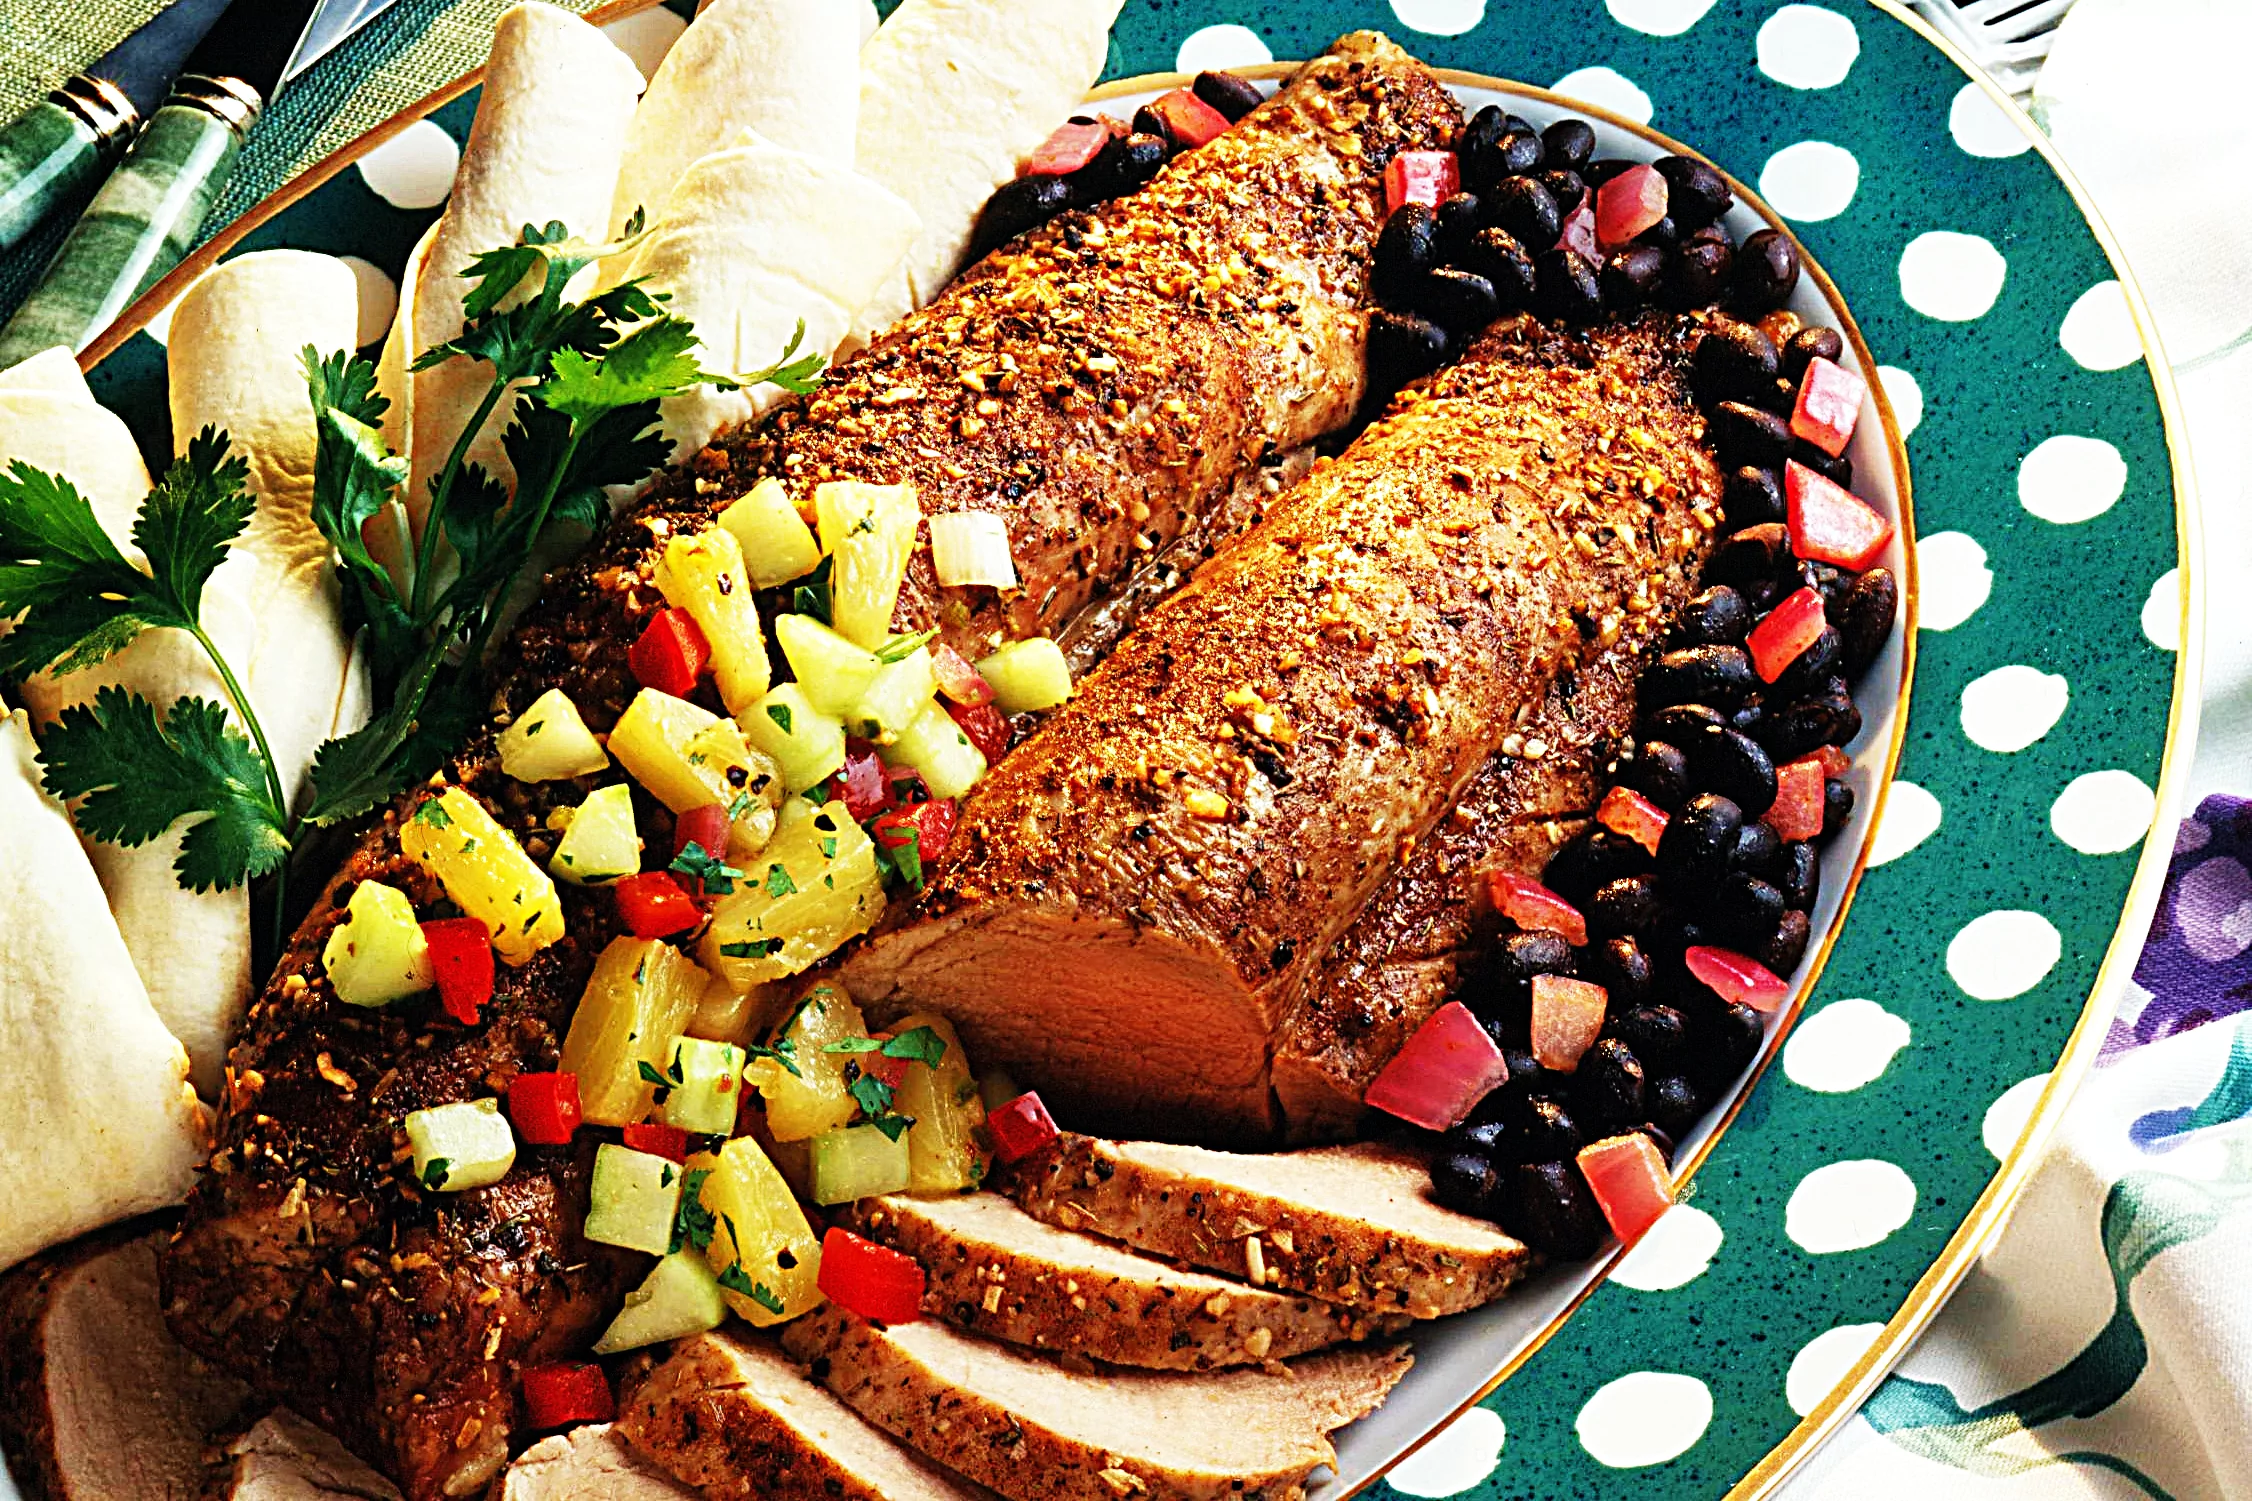 Stupid-Easy Recipe for Jerk Pork Tenderloin with Black Beans and Pineapple & Cucumber Salsa (#1 Top-Rated)